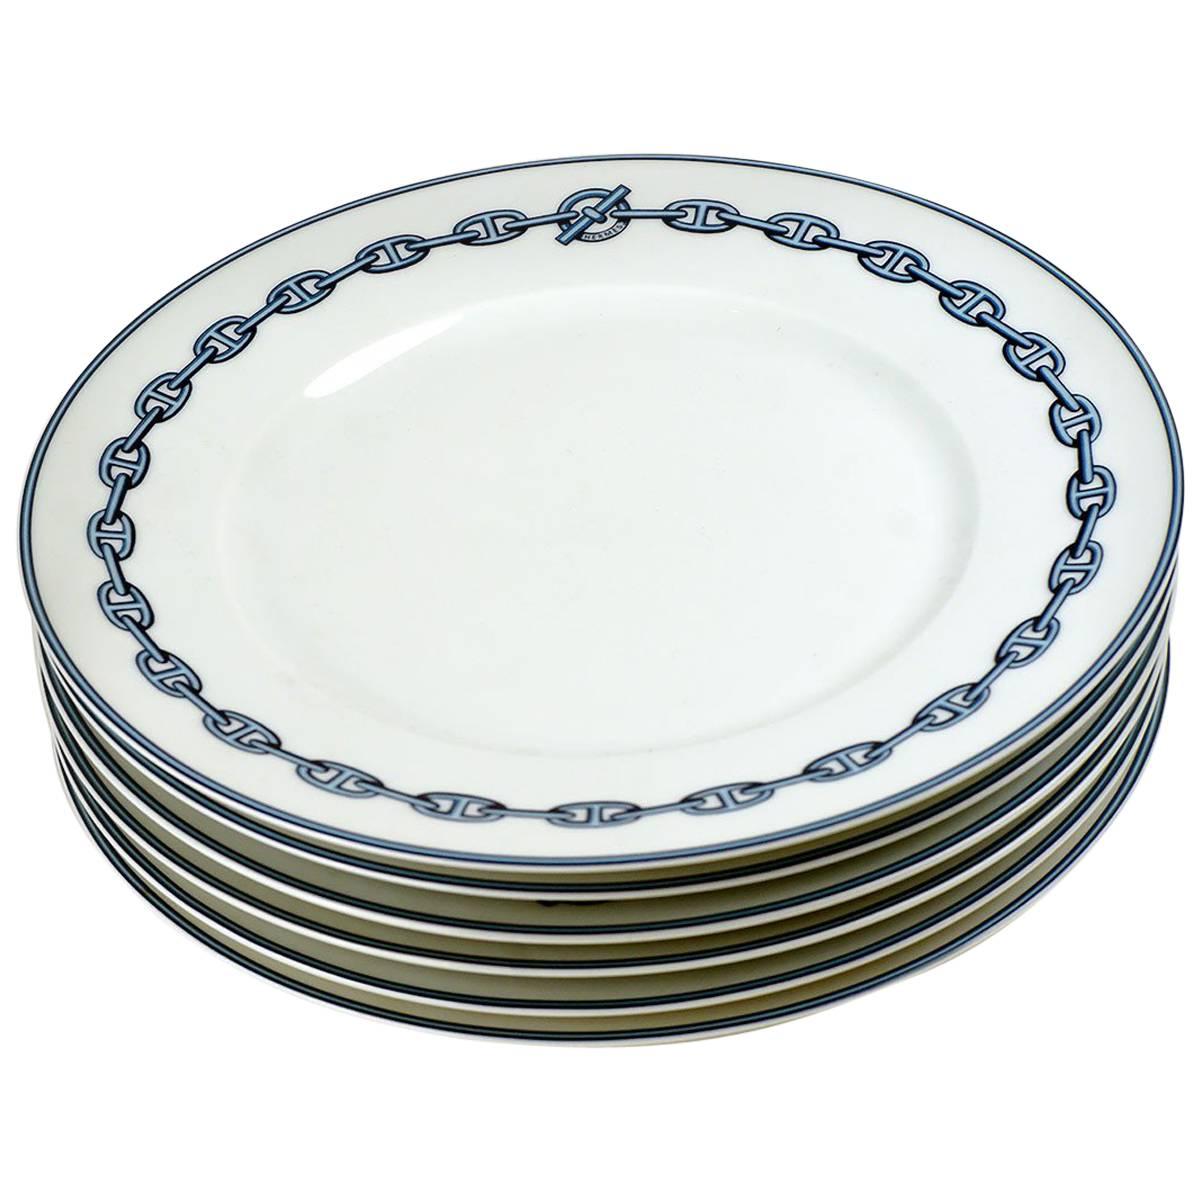 Hermes Chaine d'Ancre Blue Large Dinner Plates, Set of Six